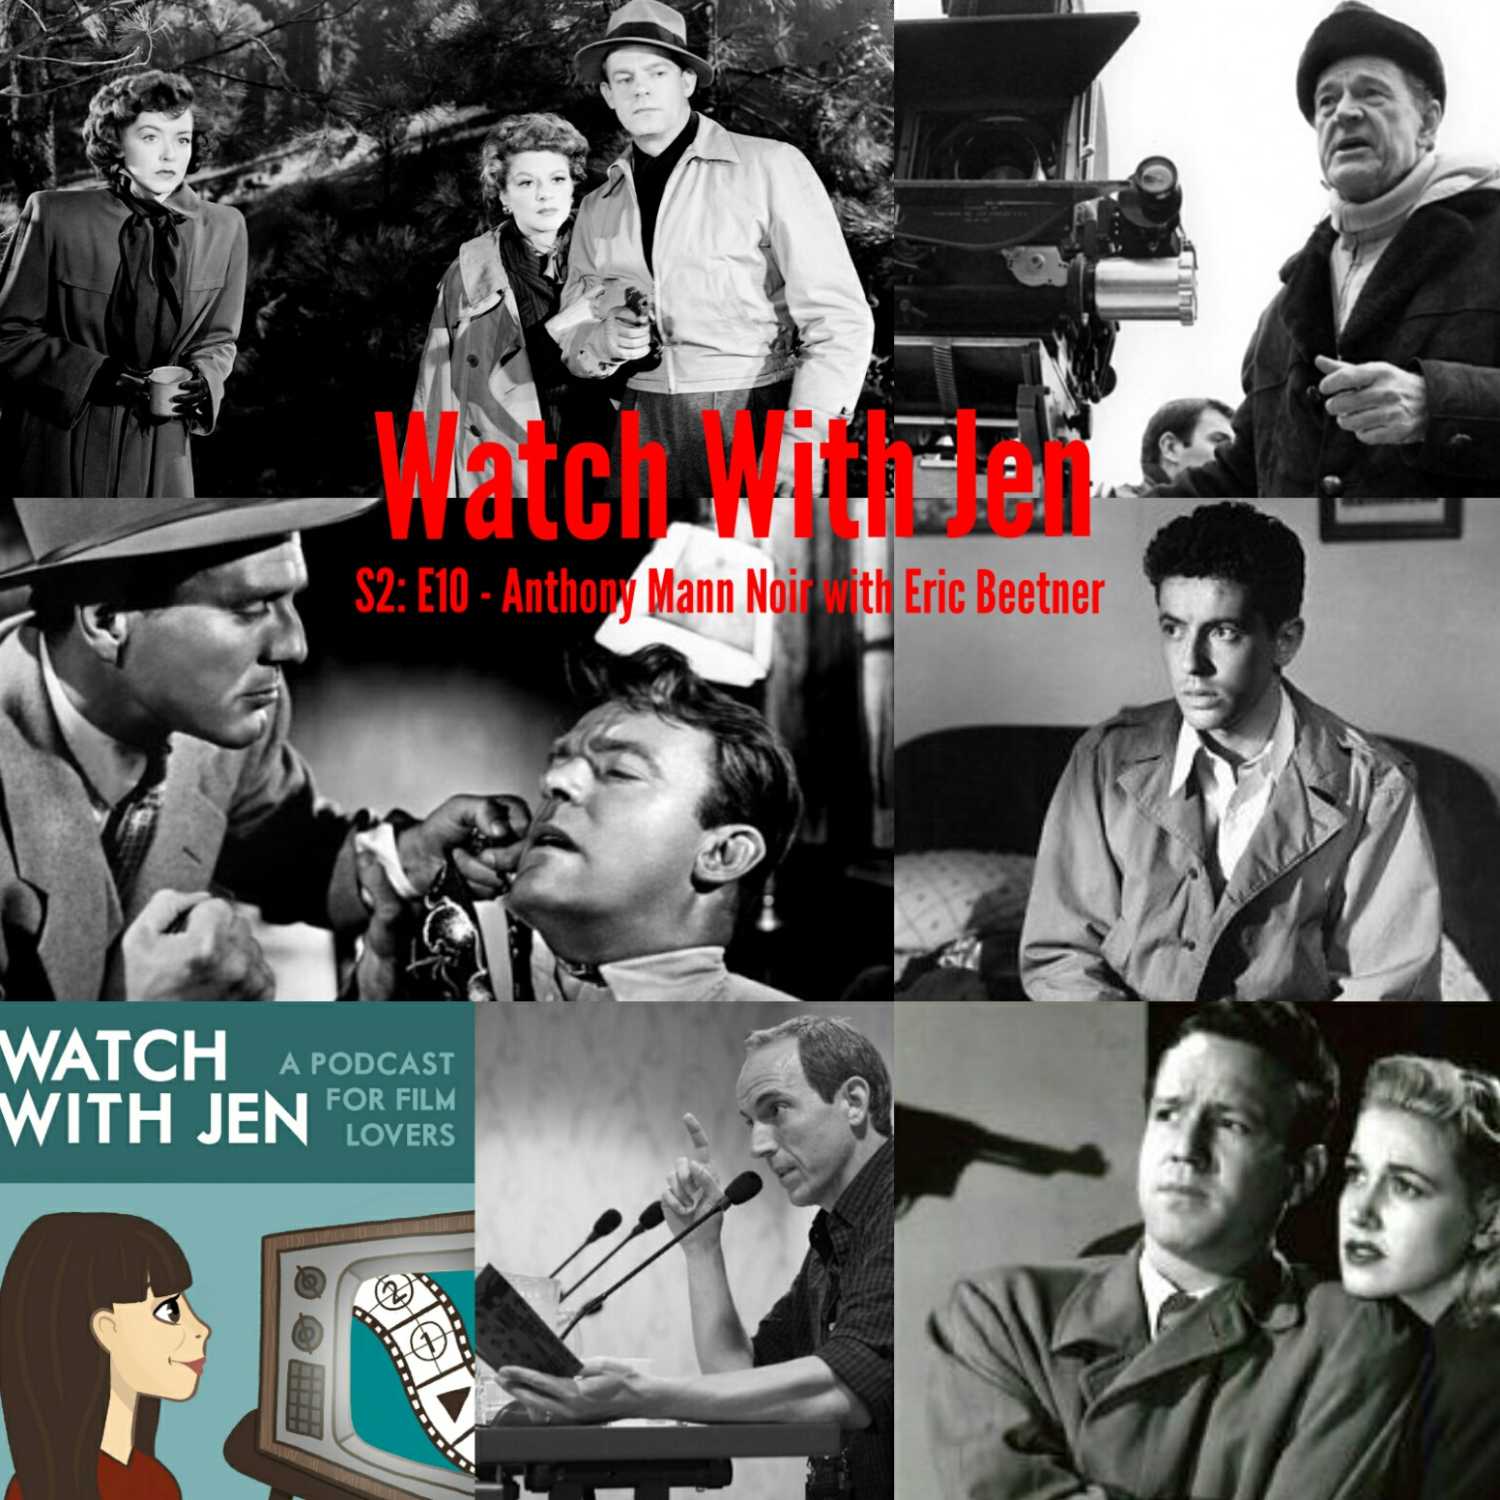 Watch With Jen - S2: E10 - Anthony Mann Noir with Eric Beetner